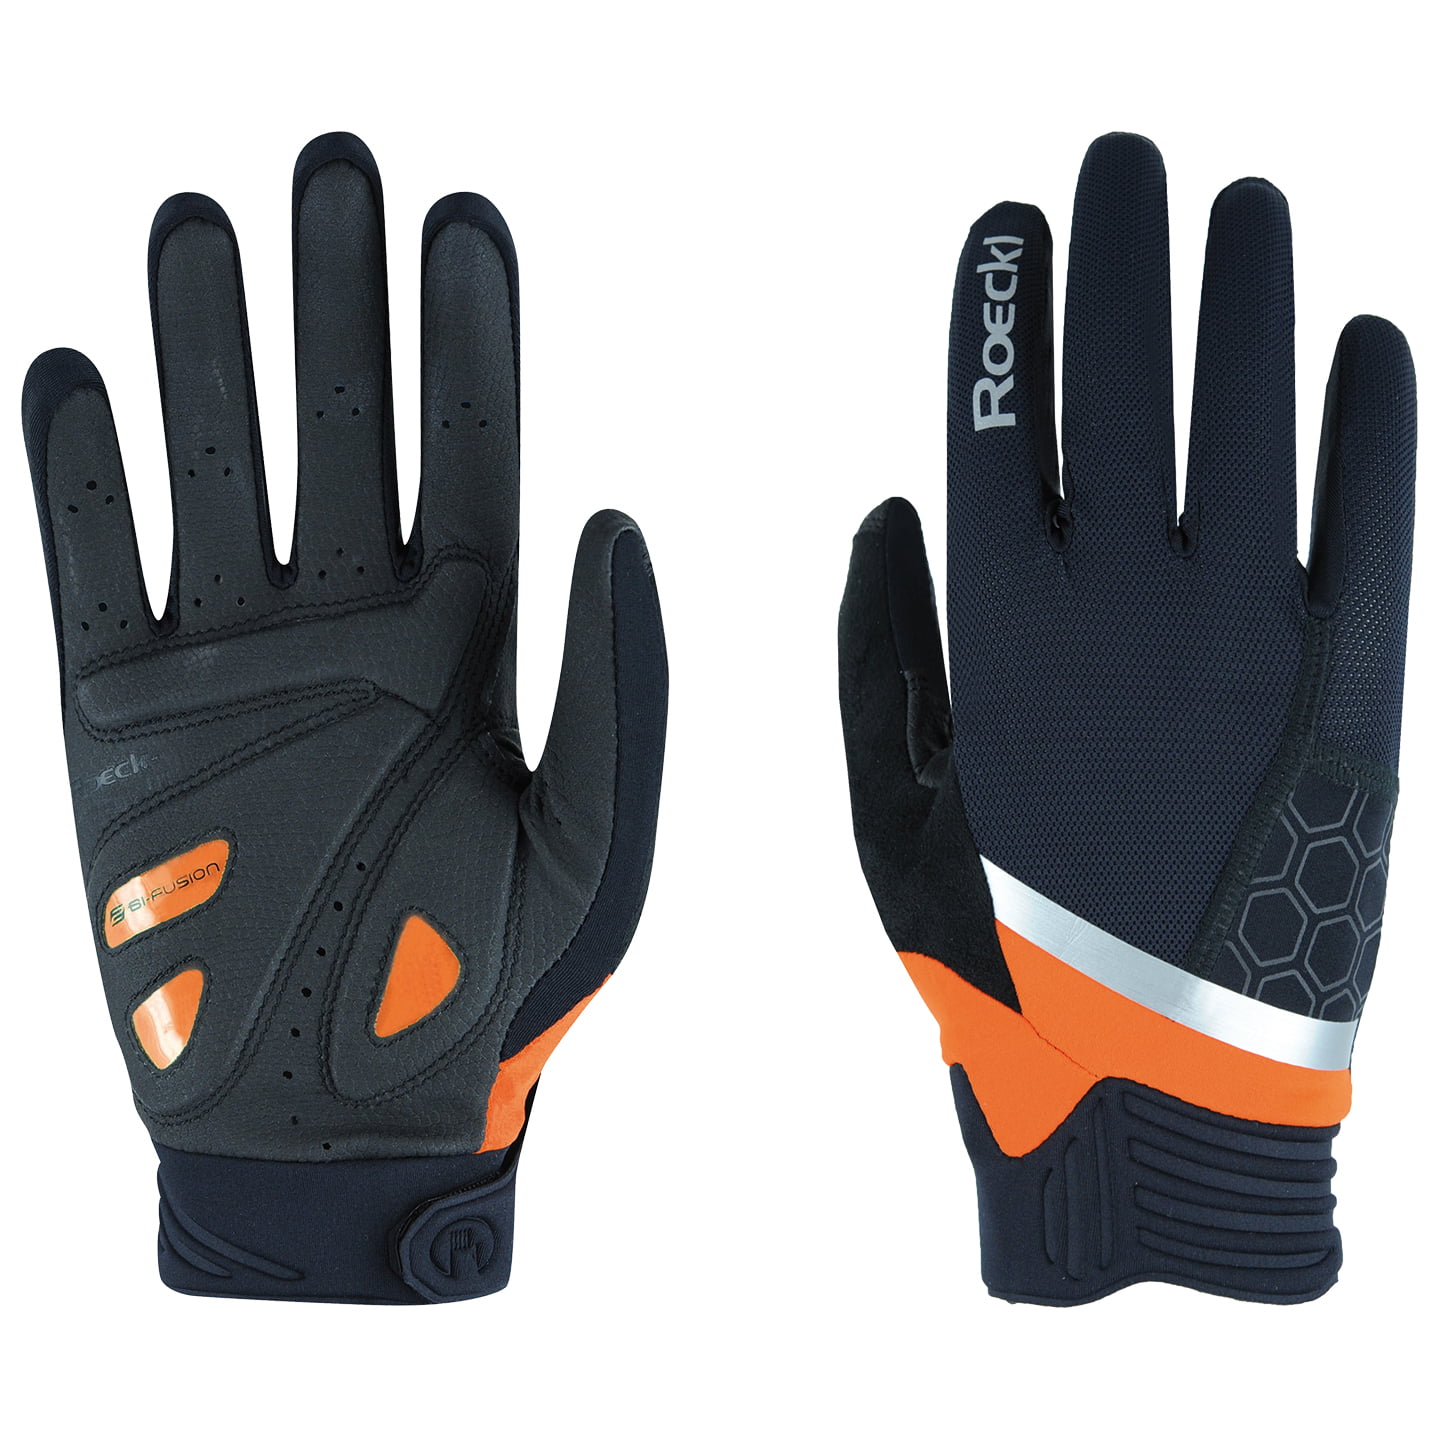 ROECKL Morgex Full Finger Gloves Cycling Gloves, for men, size 10, Cycle gloves, Cycle wear